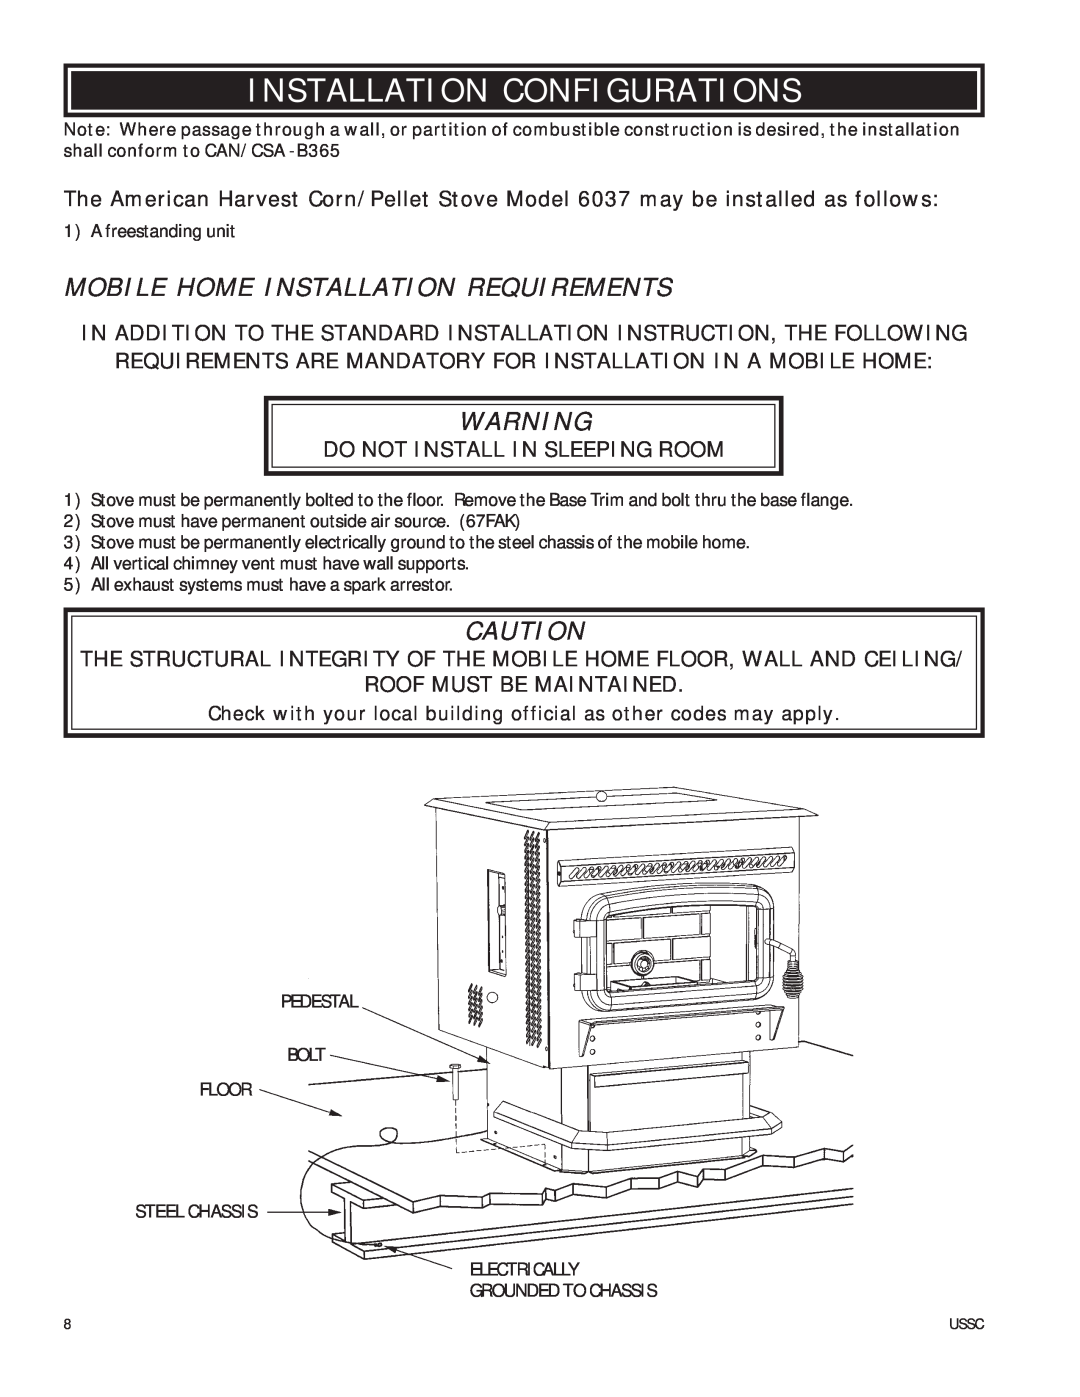 United States Stove 6037 Installation Configurations, Mobile Home Installation Requirements, Roof Must Be Maintained 